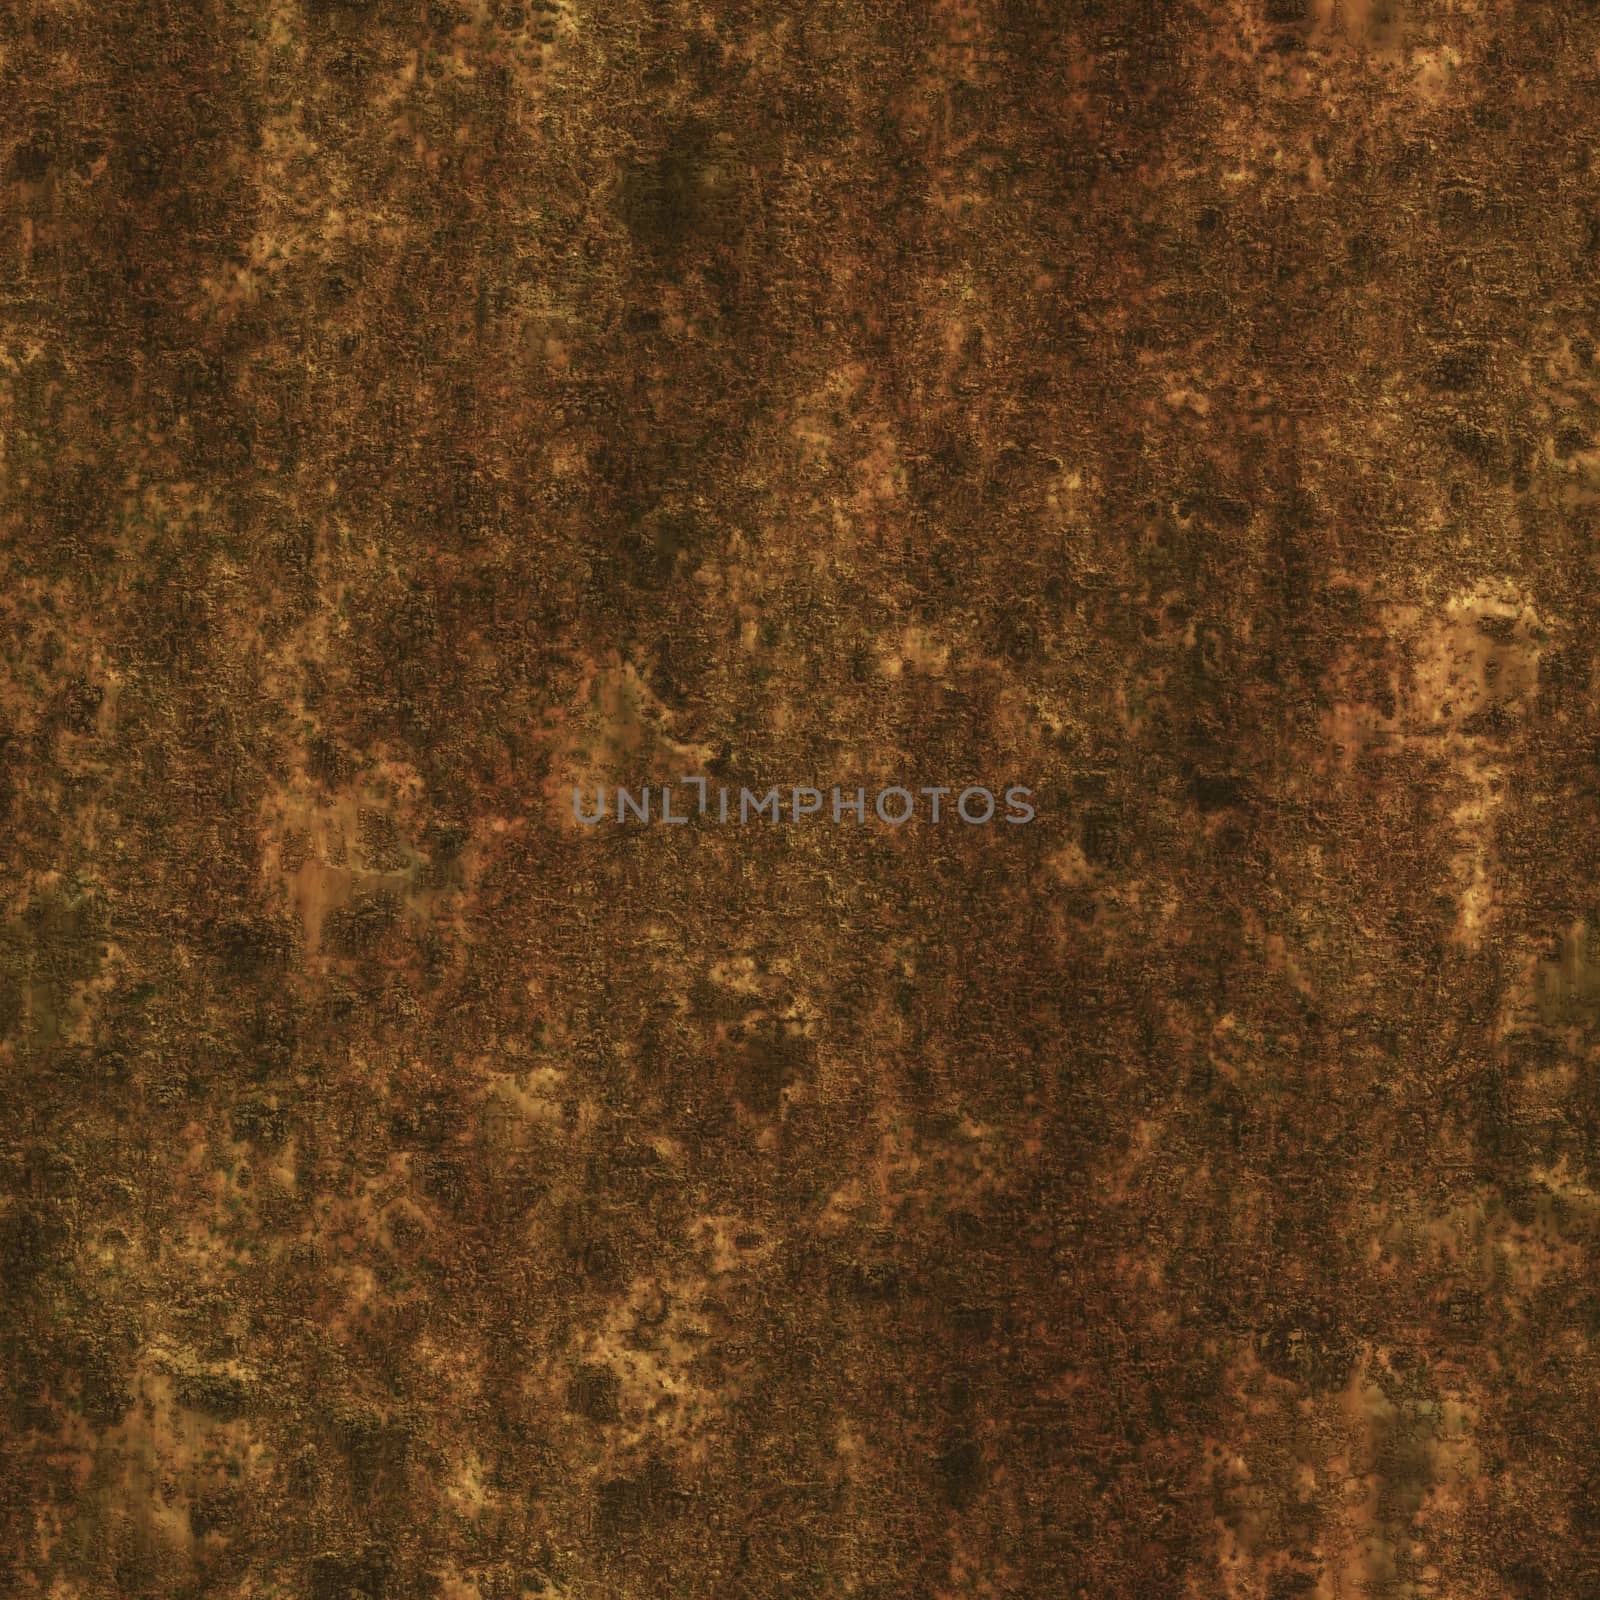 2d illustration of a seamless rusty surface texture